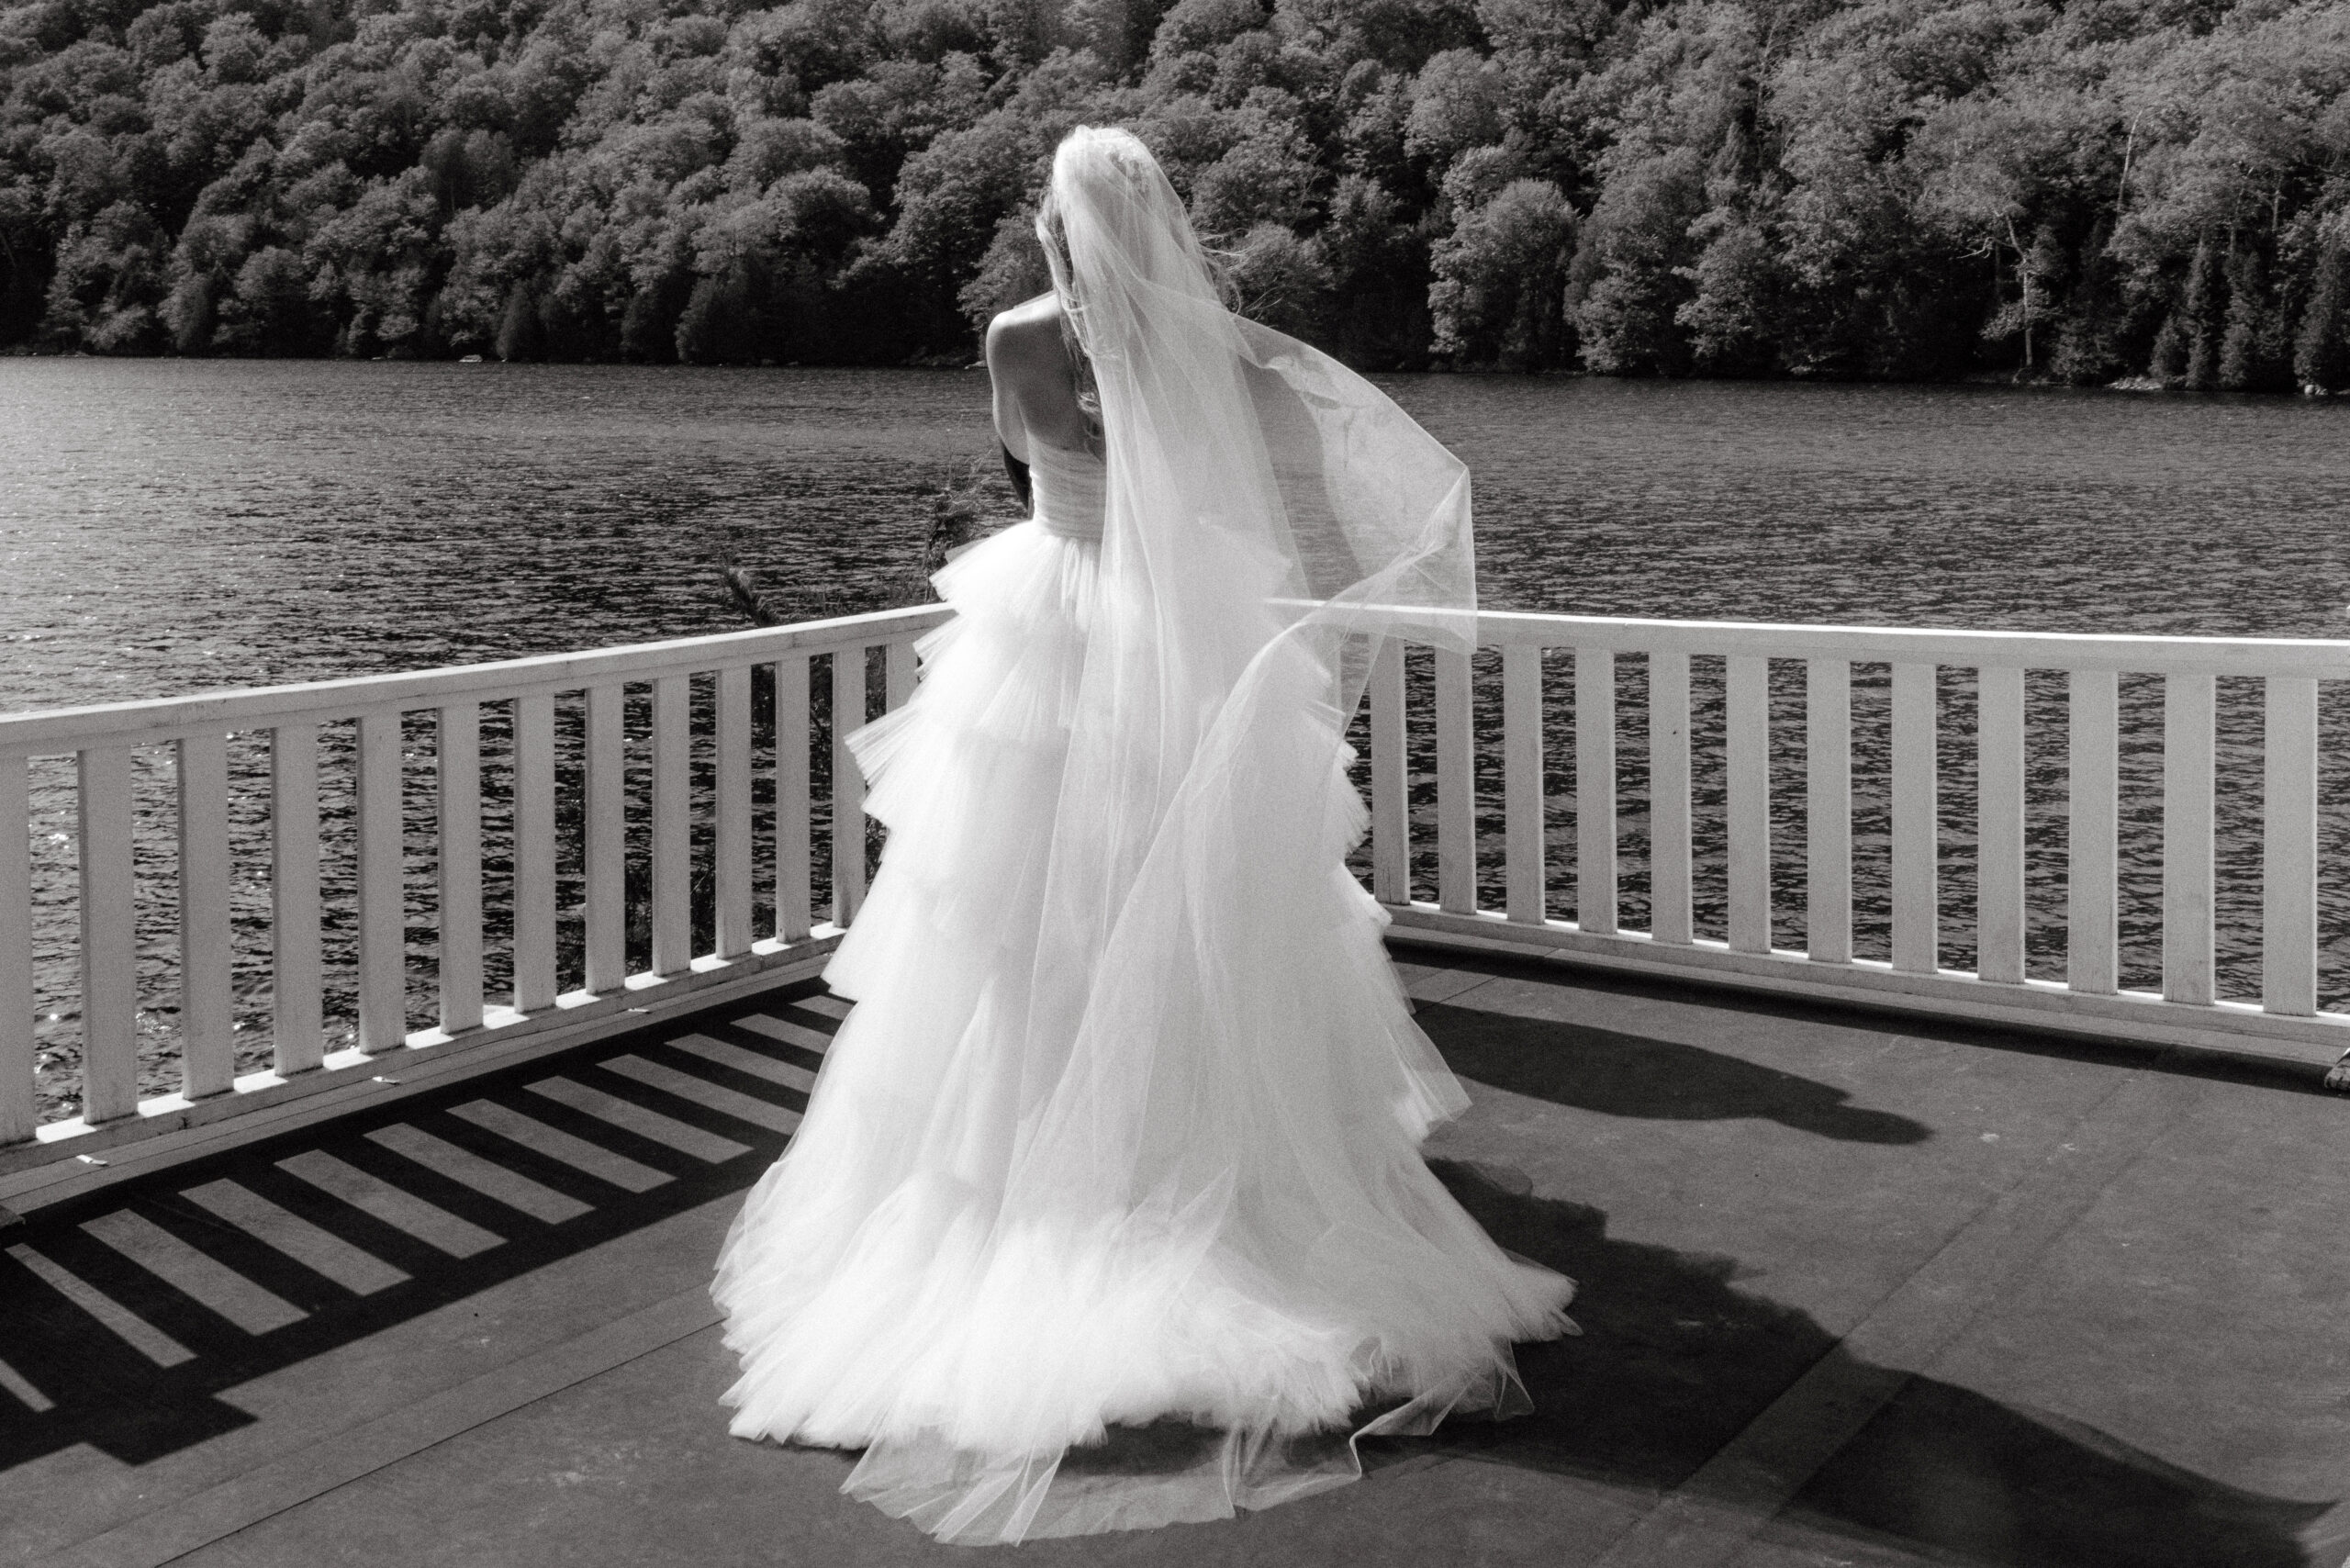 Black and white editorial first look photo. Upstate New York Wedding image by Jenny Fu Studio